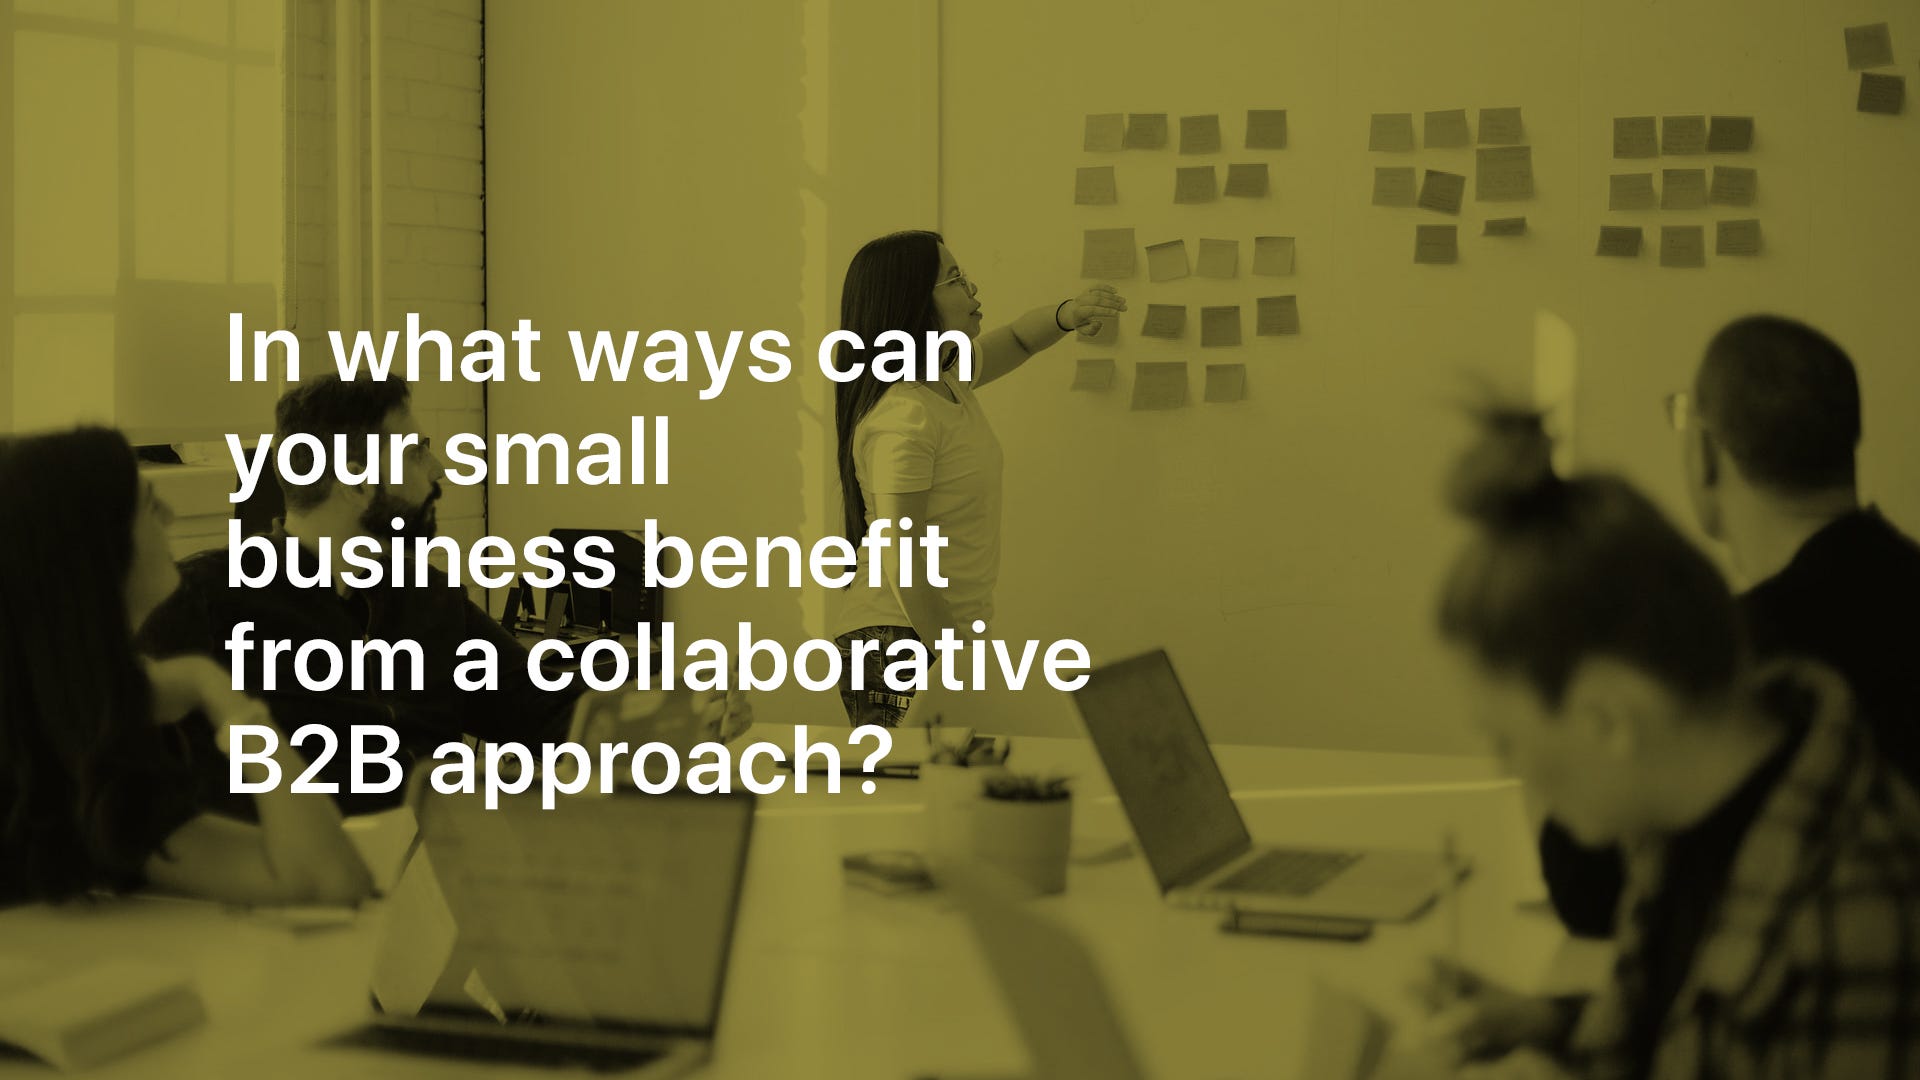 How Can Small Businesses Benefit from B2B Collaborations?